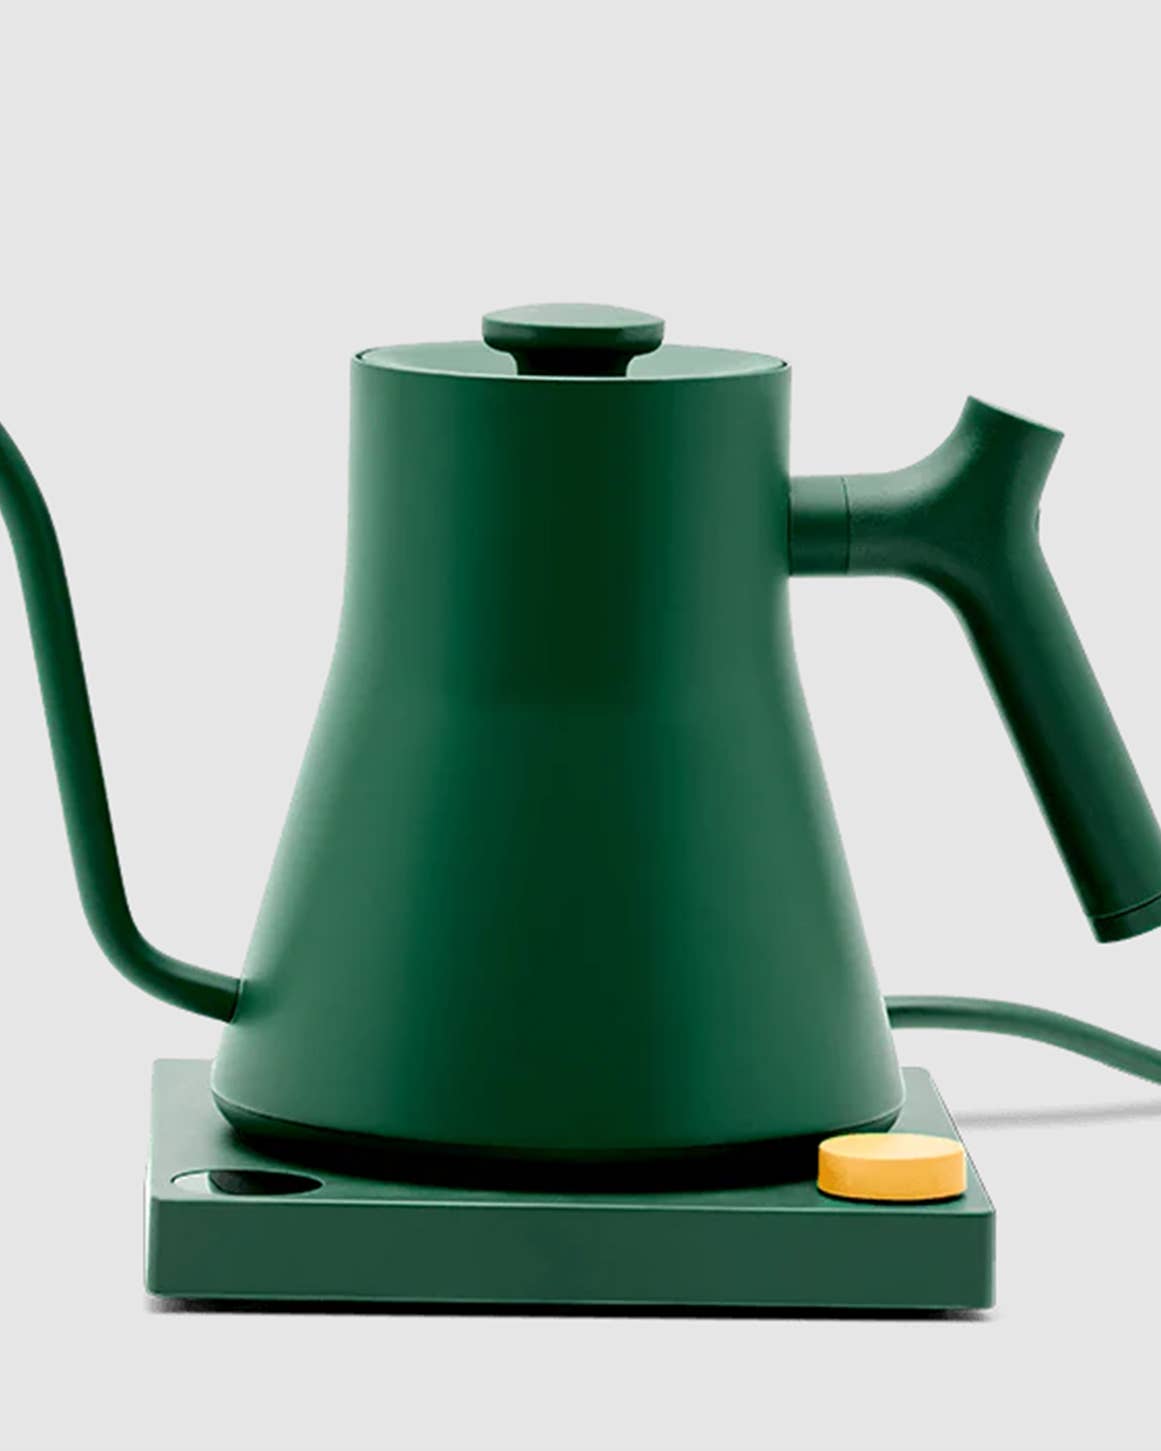 This Limited Edition Kettle Will Make Fellow Coffee Nerds Green With Envy